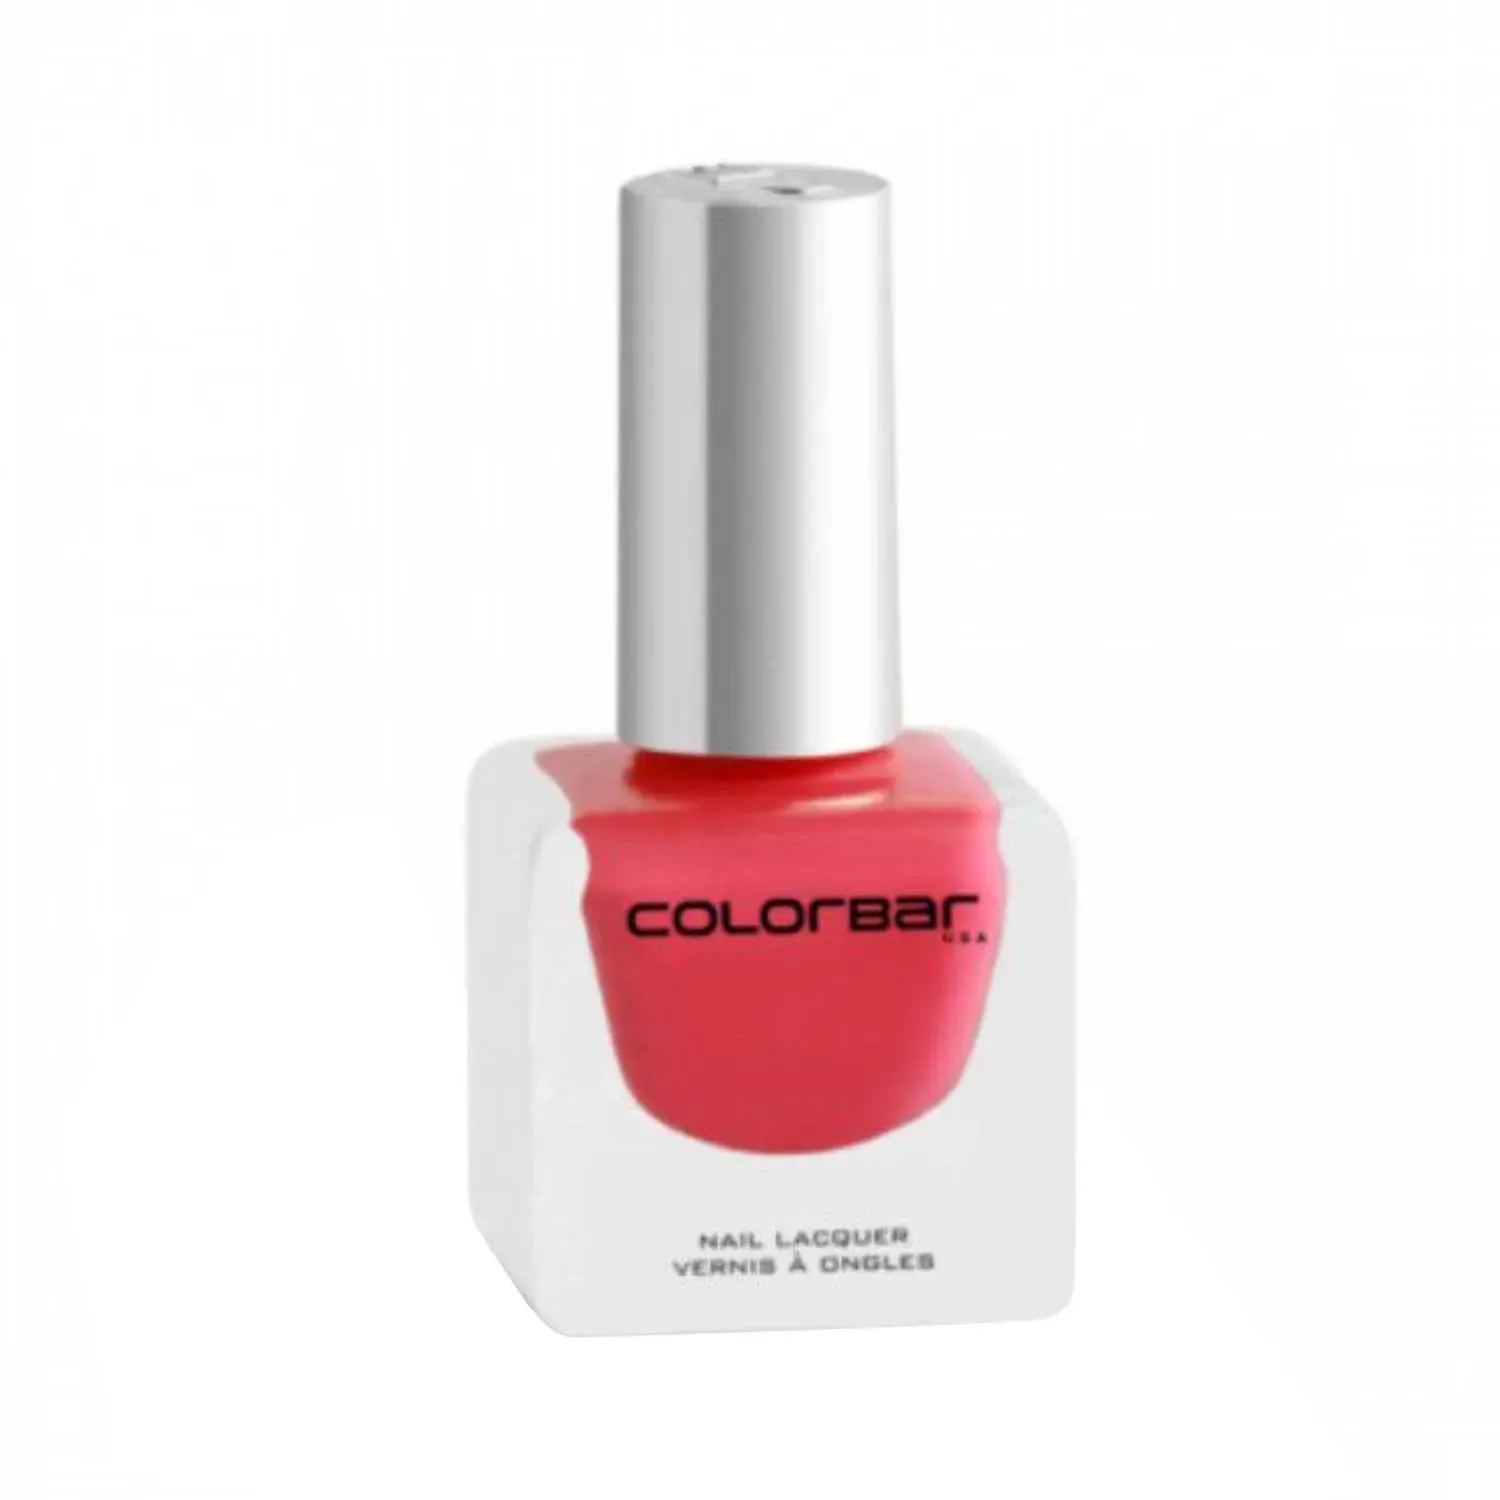 COLORBAR Vegan Nail Lacquer-Glancy-295 Peach - Price in India, Buy COLORBAR  Vegan Nail Lacquer-Glancy-295 Peach Online In India, Reviews, Ratings &  Features | Flipkart.com